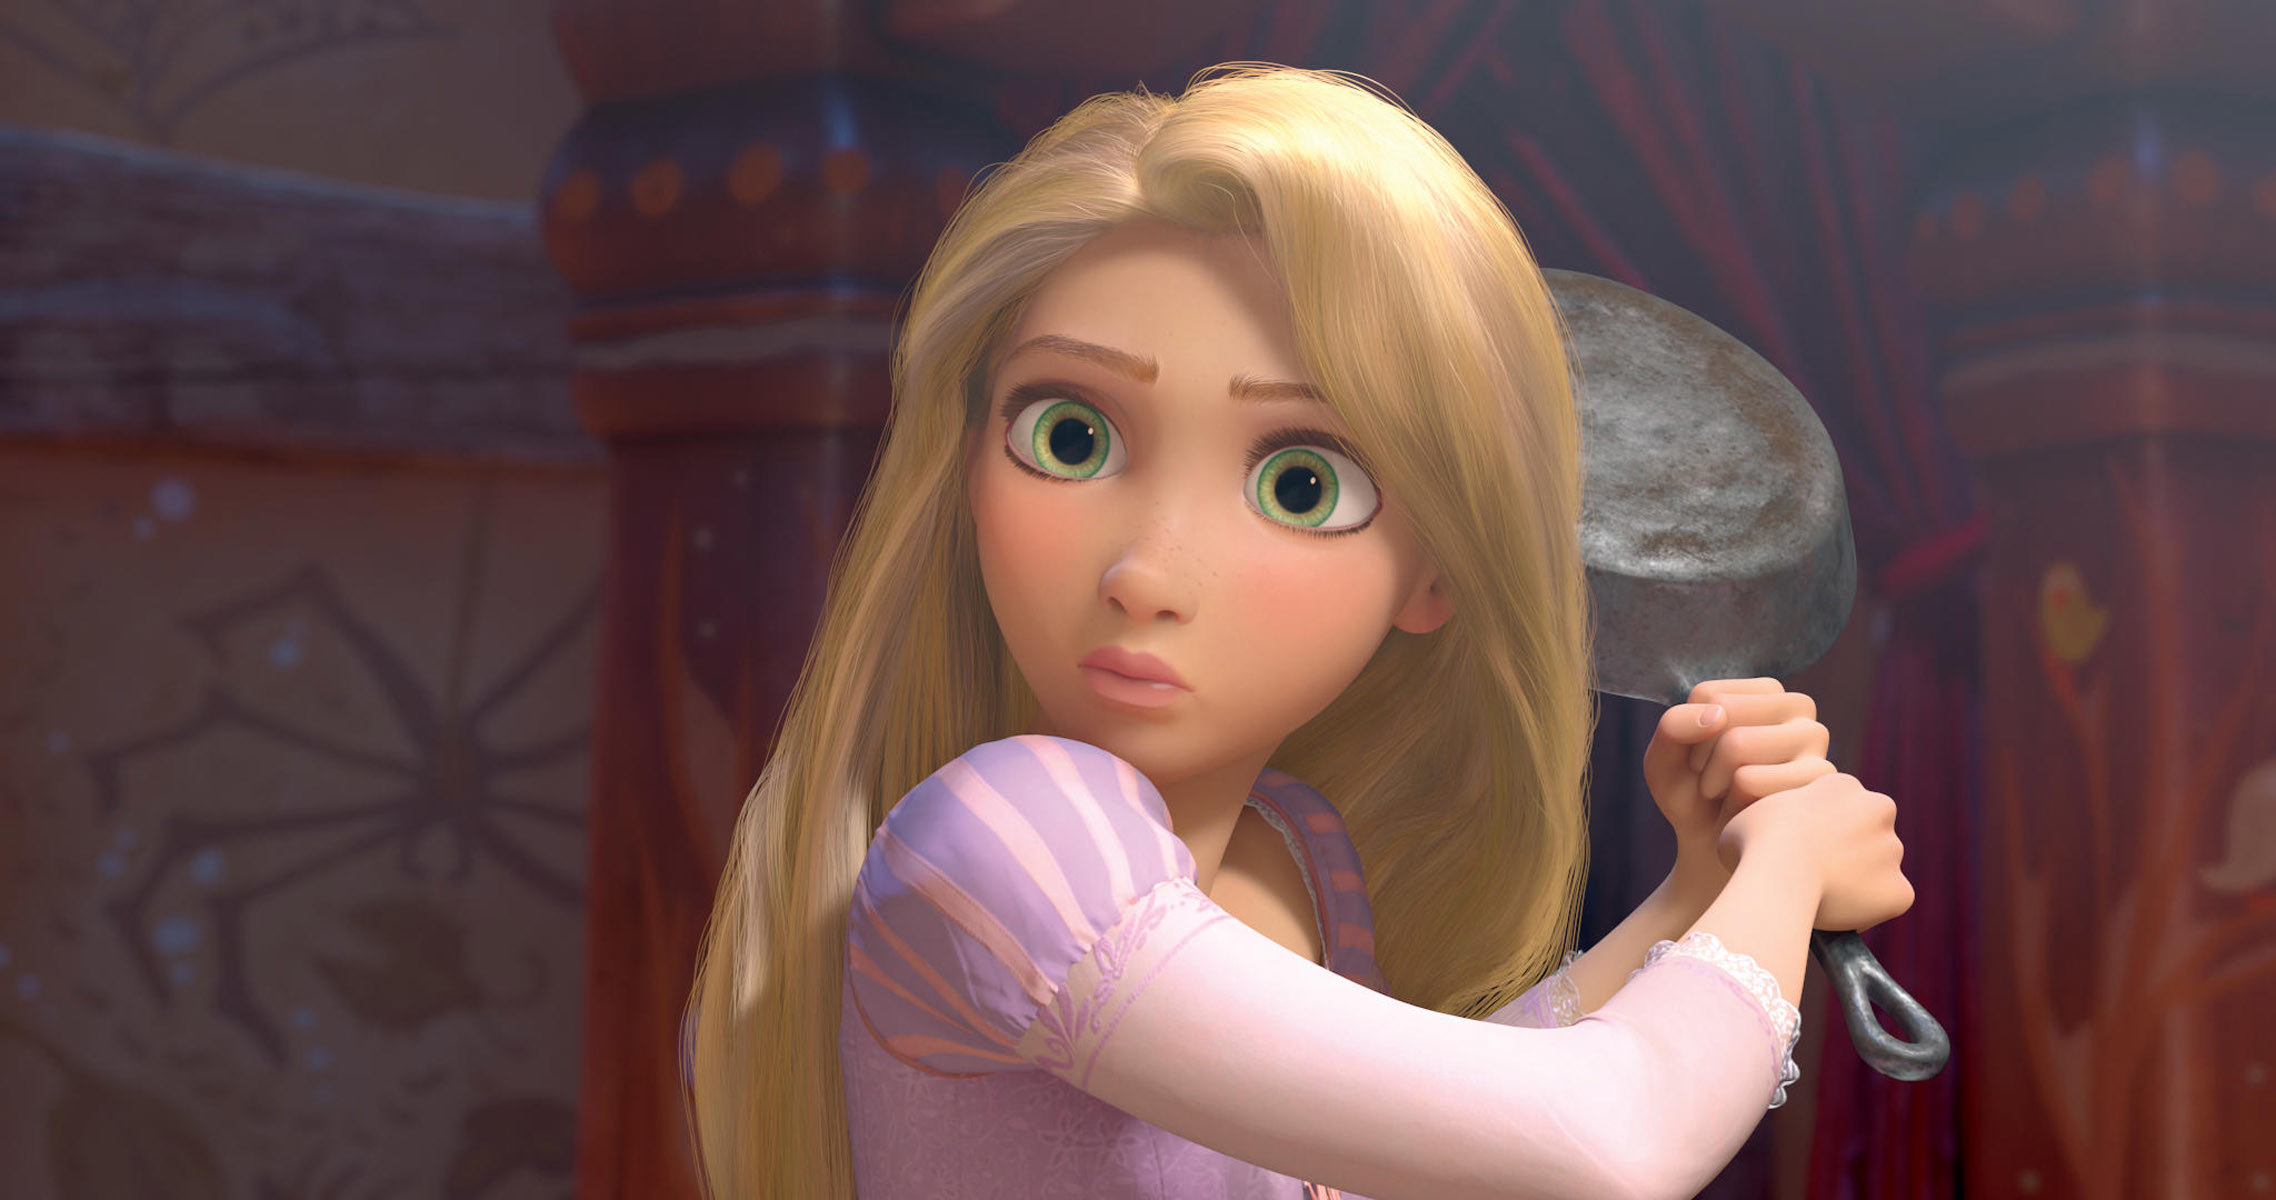 The animated Rapunzel holding a cast iron skillet about to hit someone